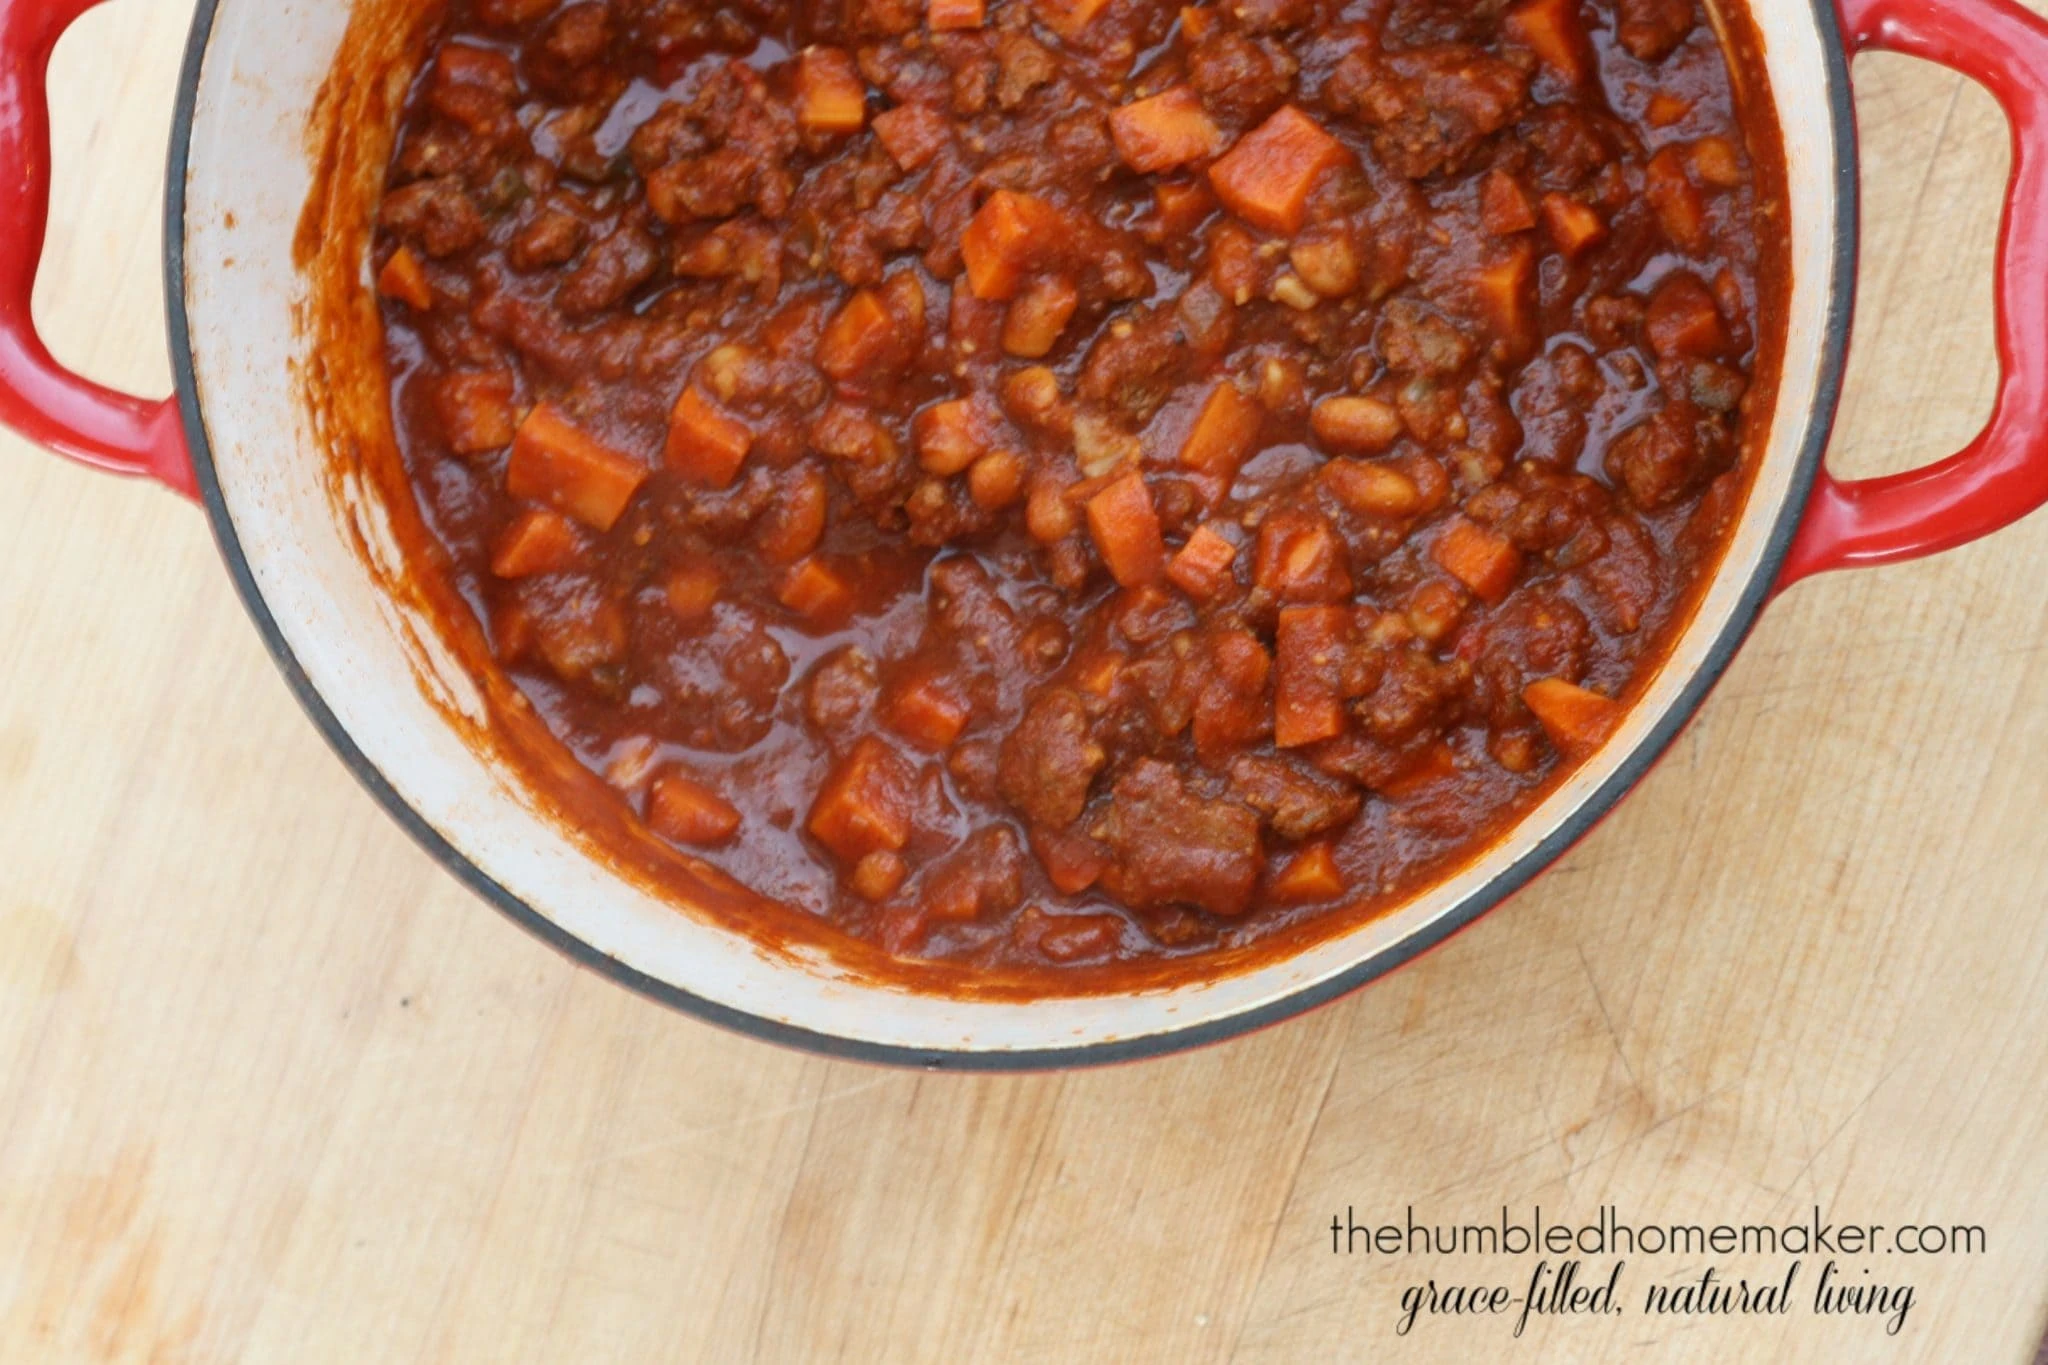 Use your Instant Pot to make this hearty sweet potato chili in just minutes!